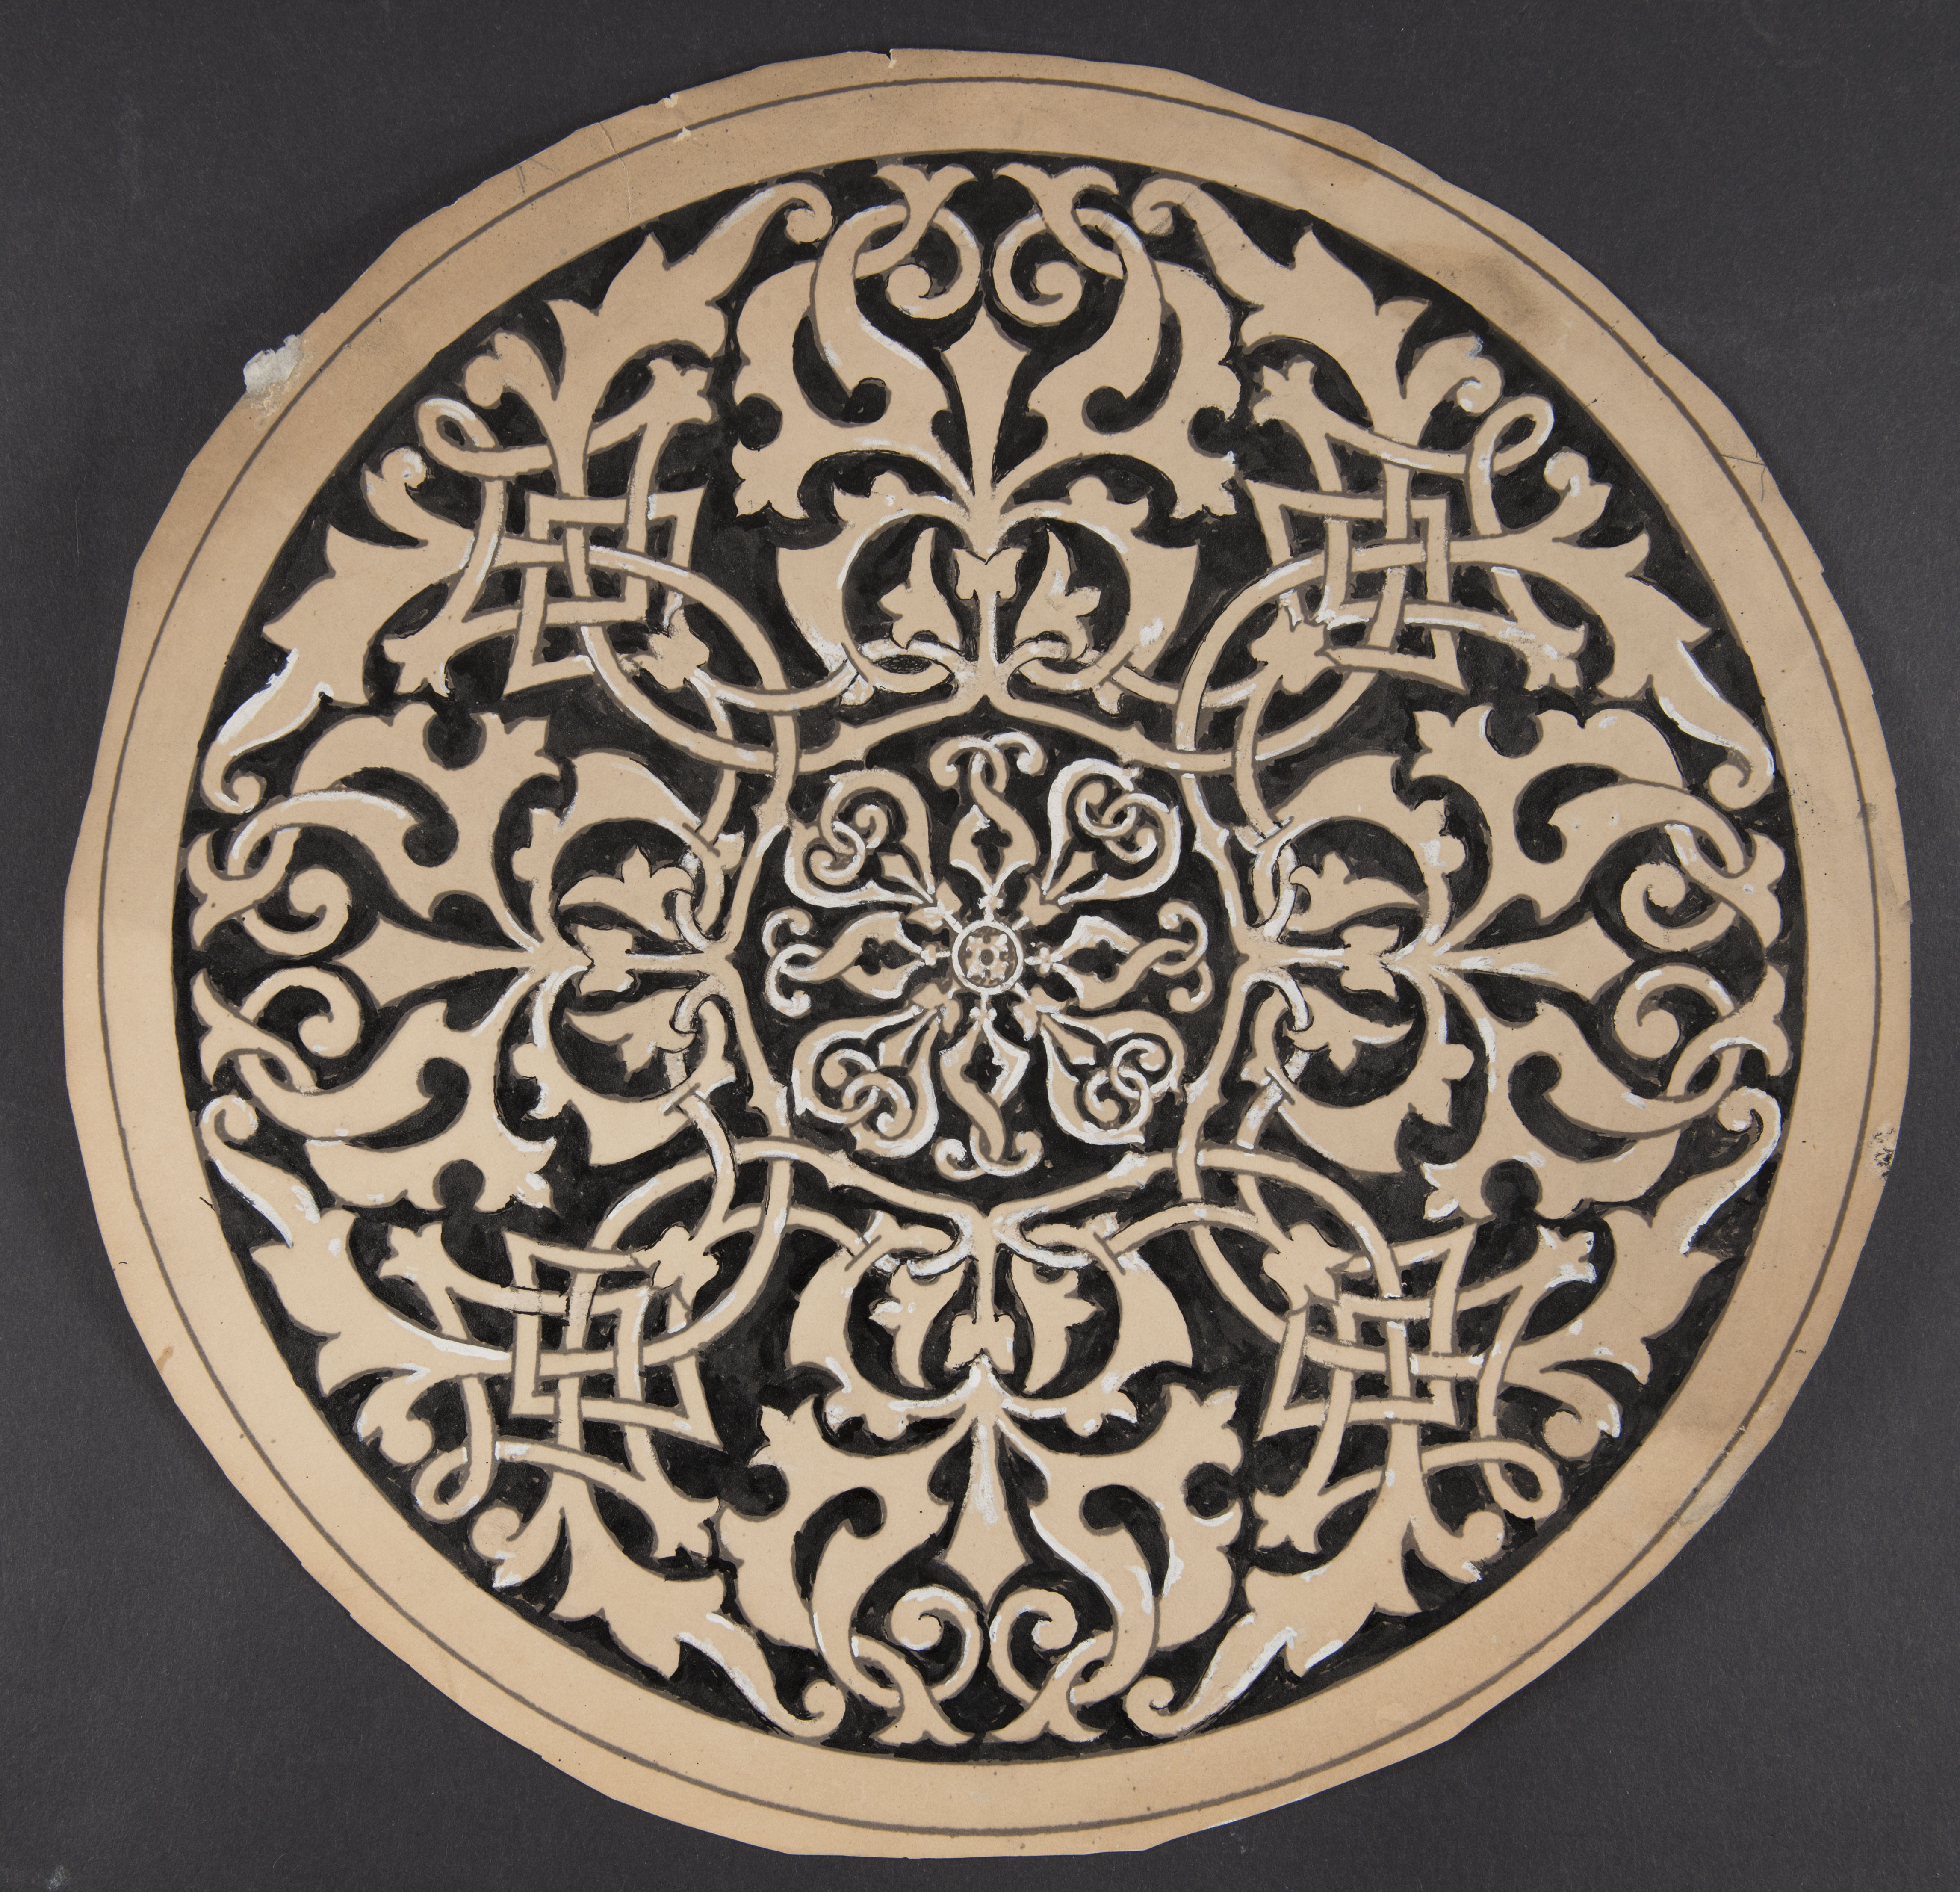 plate with an ornate, symmetrical design